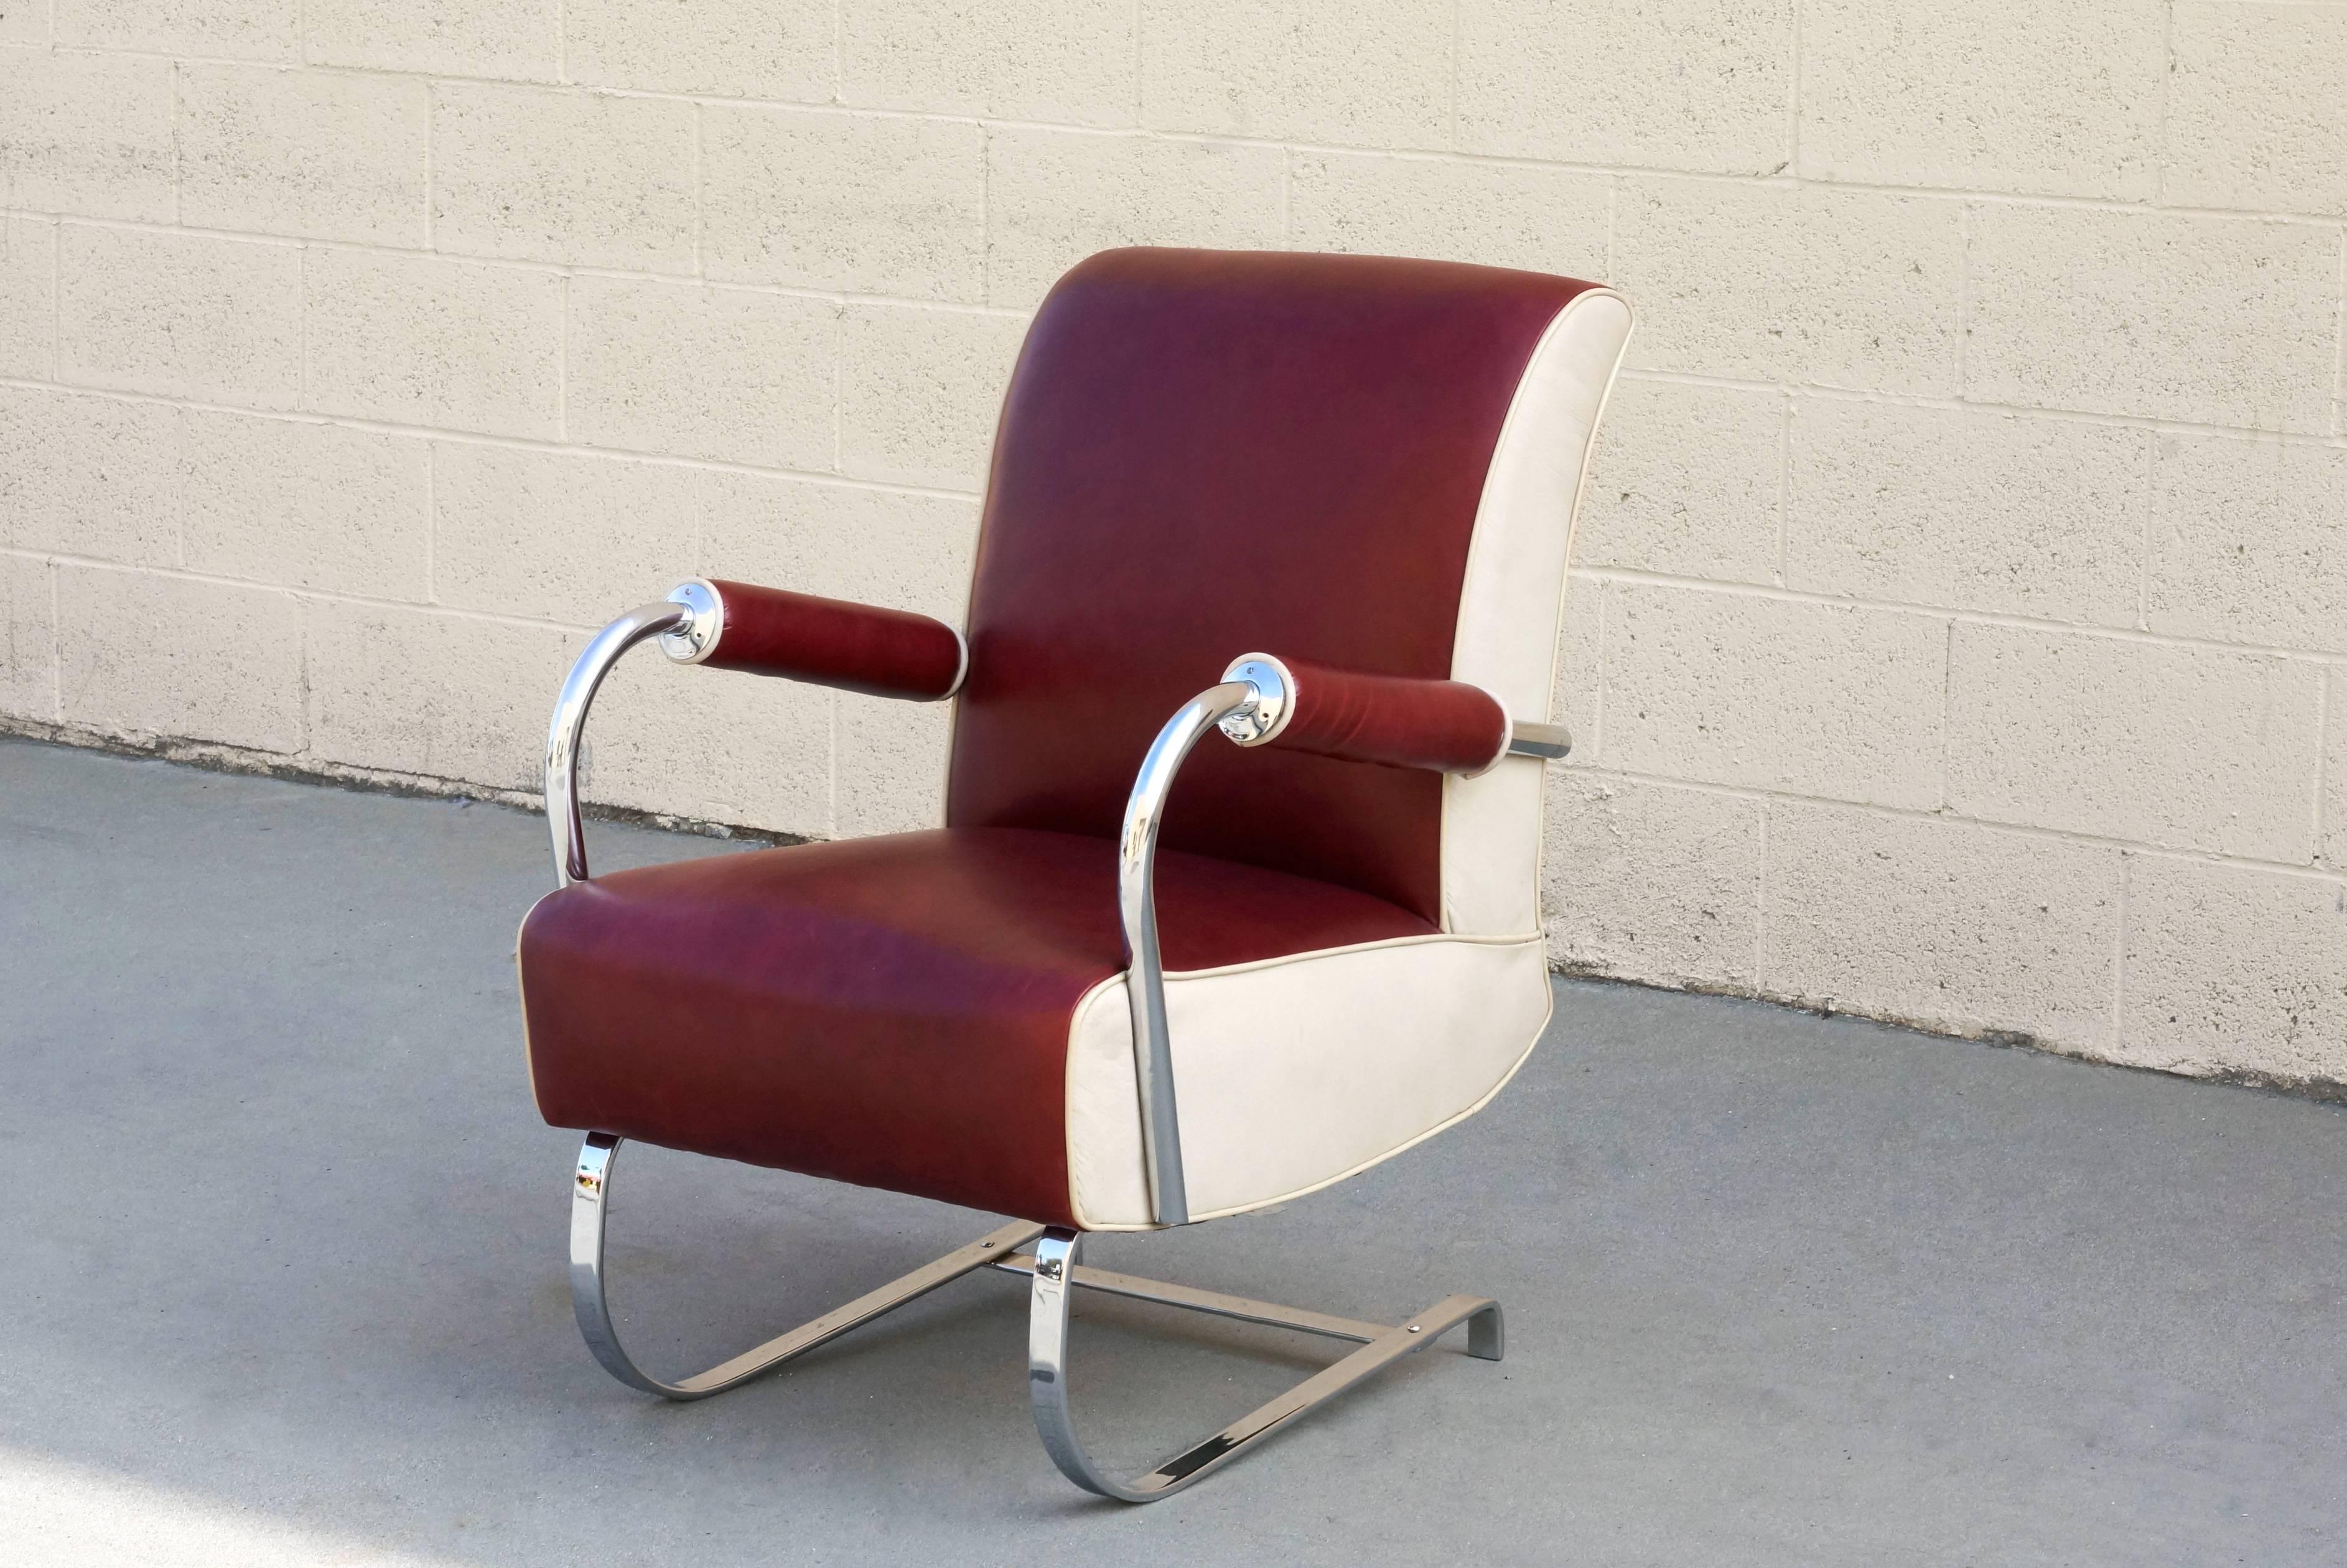 Uncommon and absolutely fantastic Kem Webber armchair, circa 1930s. Original tubular chrome arms and flat chrome base have been newly chrome-plated. Newly upholstered in two-tone cherry red and cream leather. Very cool cyclical padded armrests. A